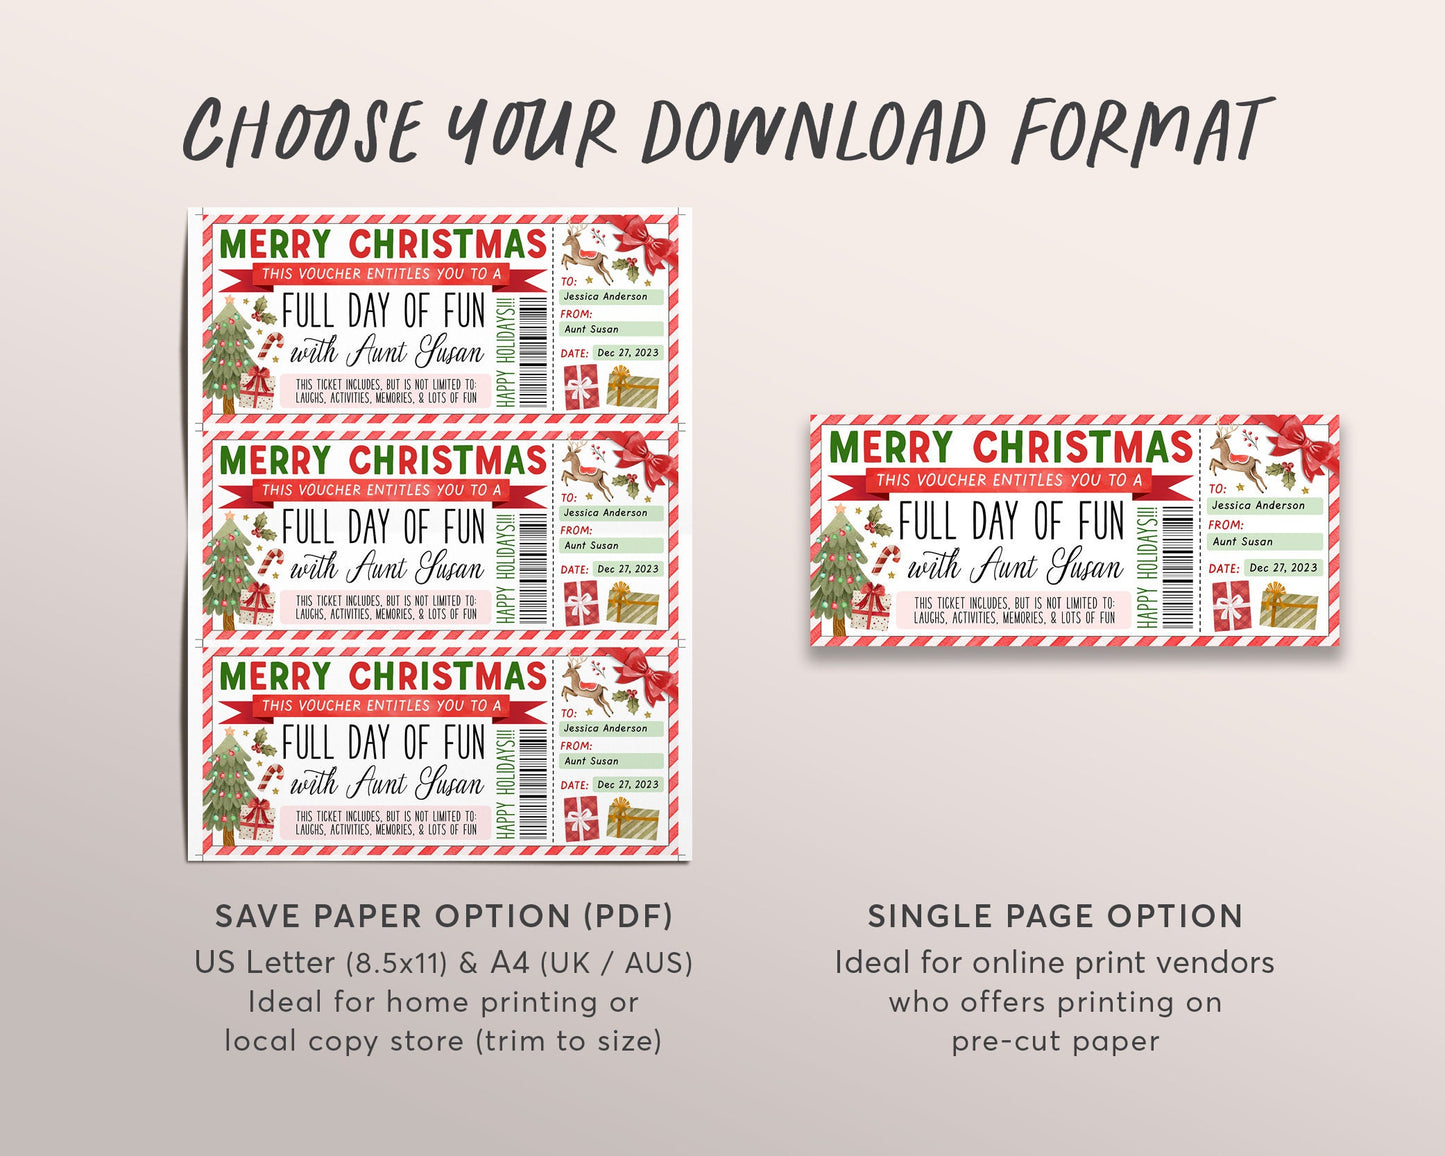 Christmas Fun Day Ticket Editable Template, Surprise Day Of Fun with Aunt Gift Certificate For Kids, Holiday Fun Experience Voucher DIY